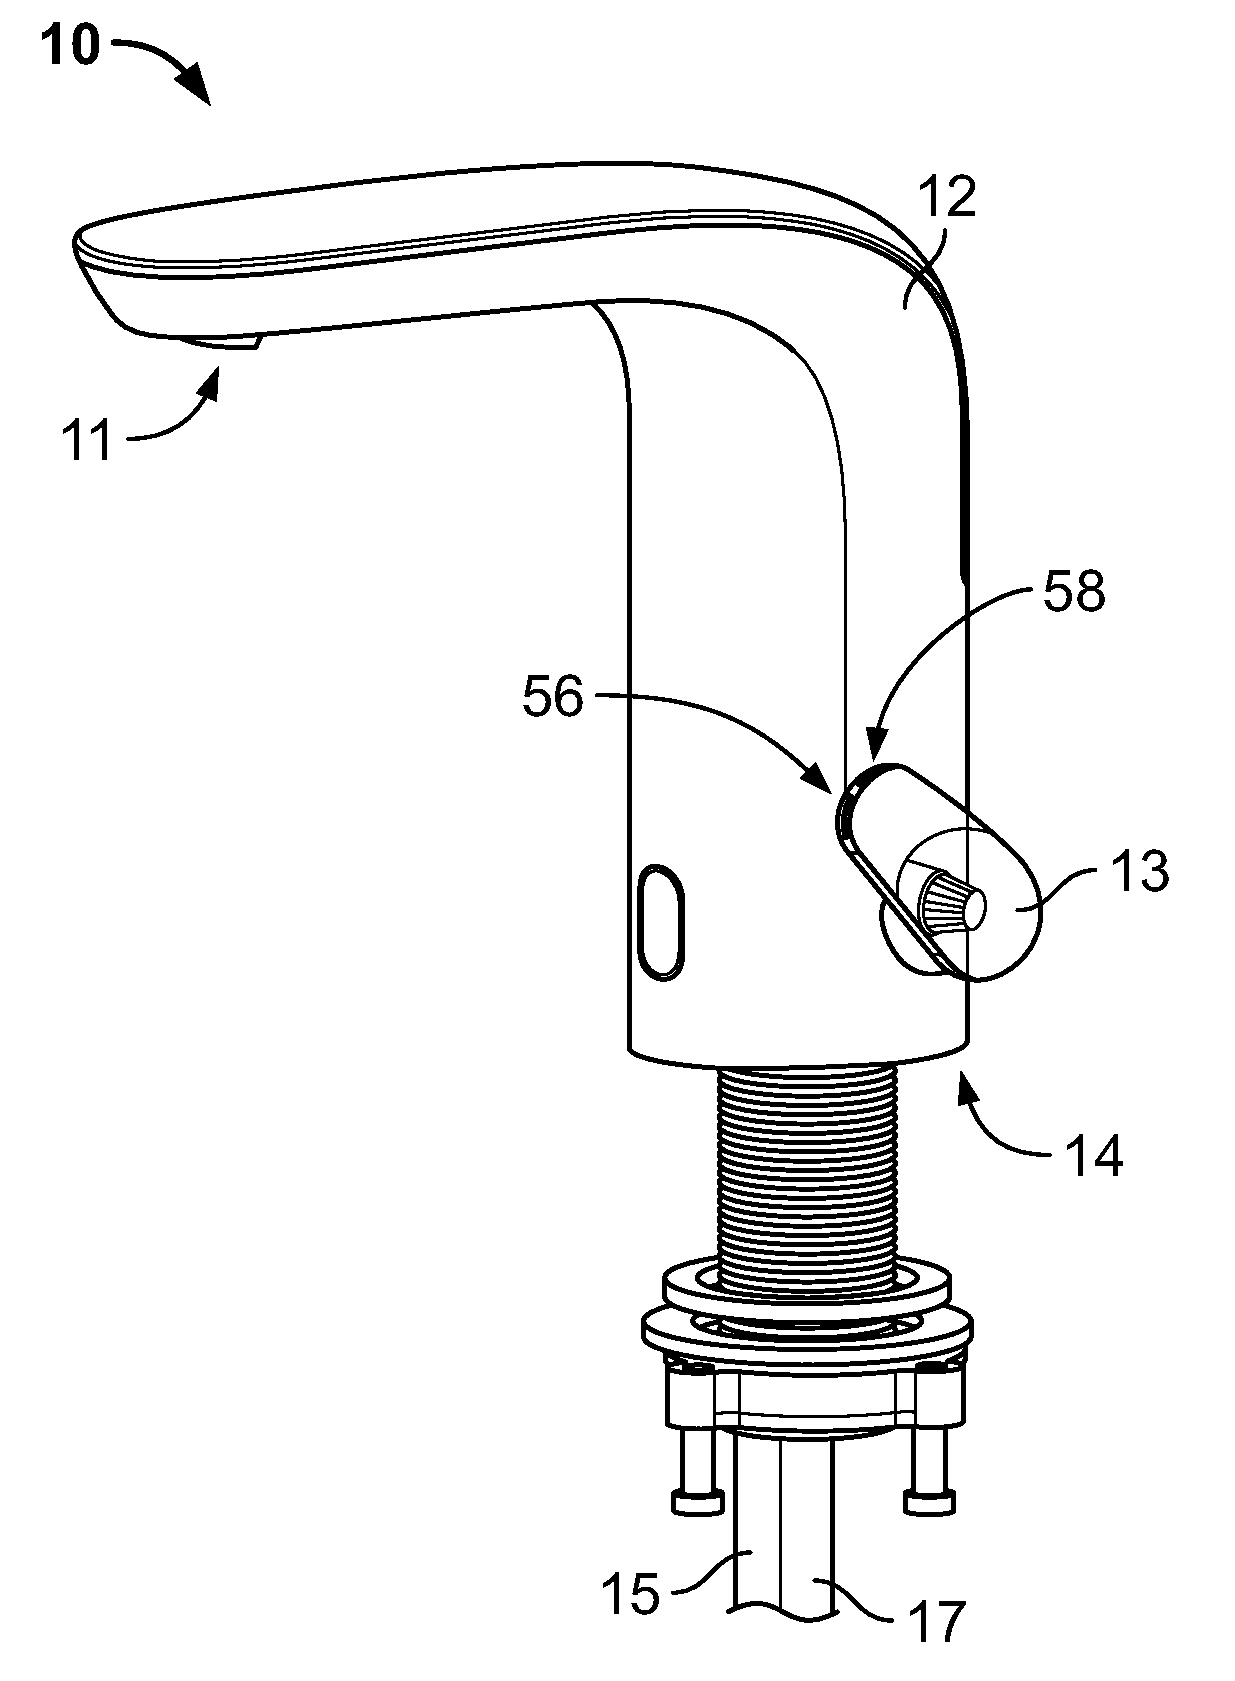 Faucet Assembly With Integrated Anti-Scald Device